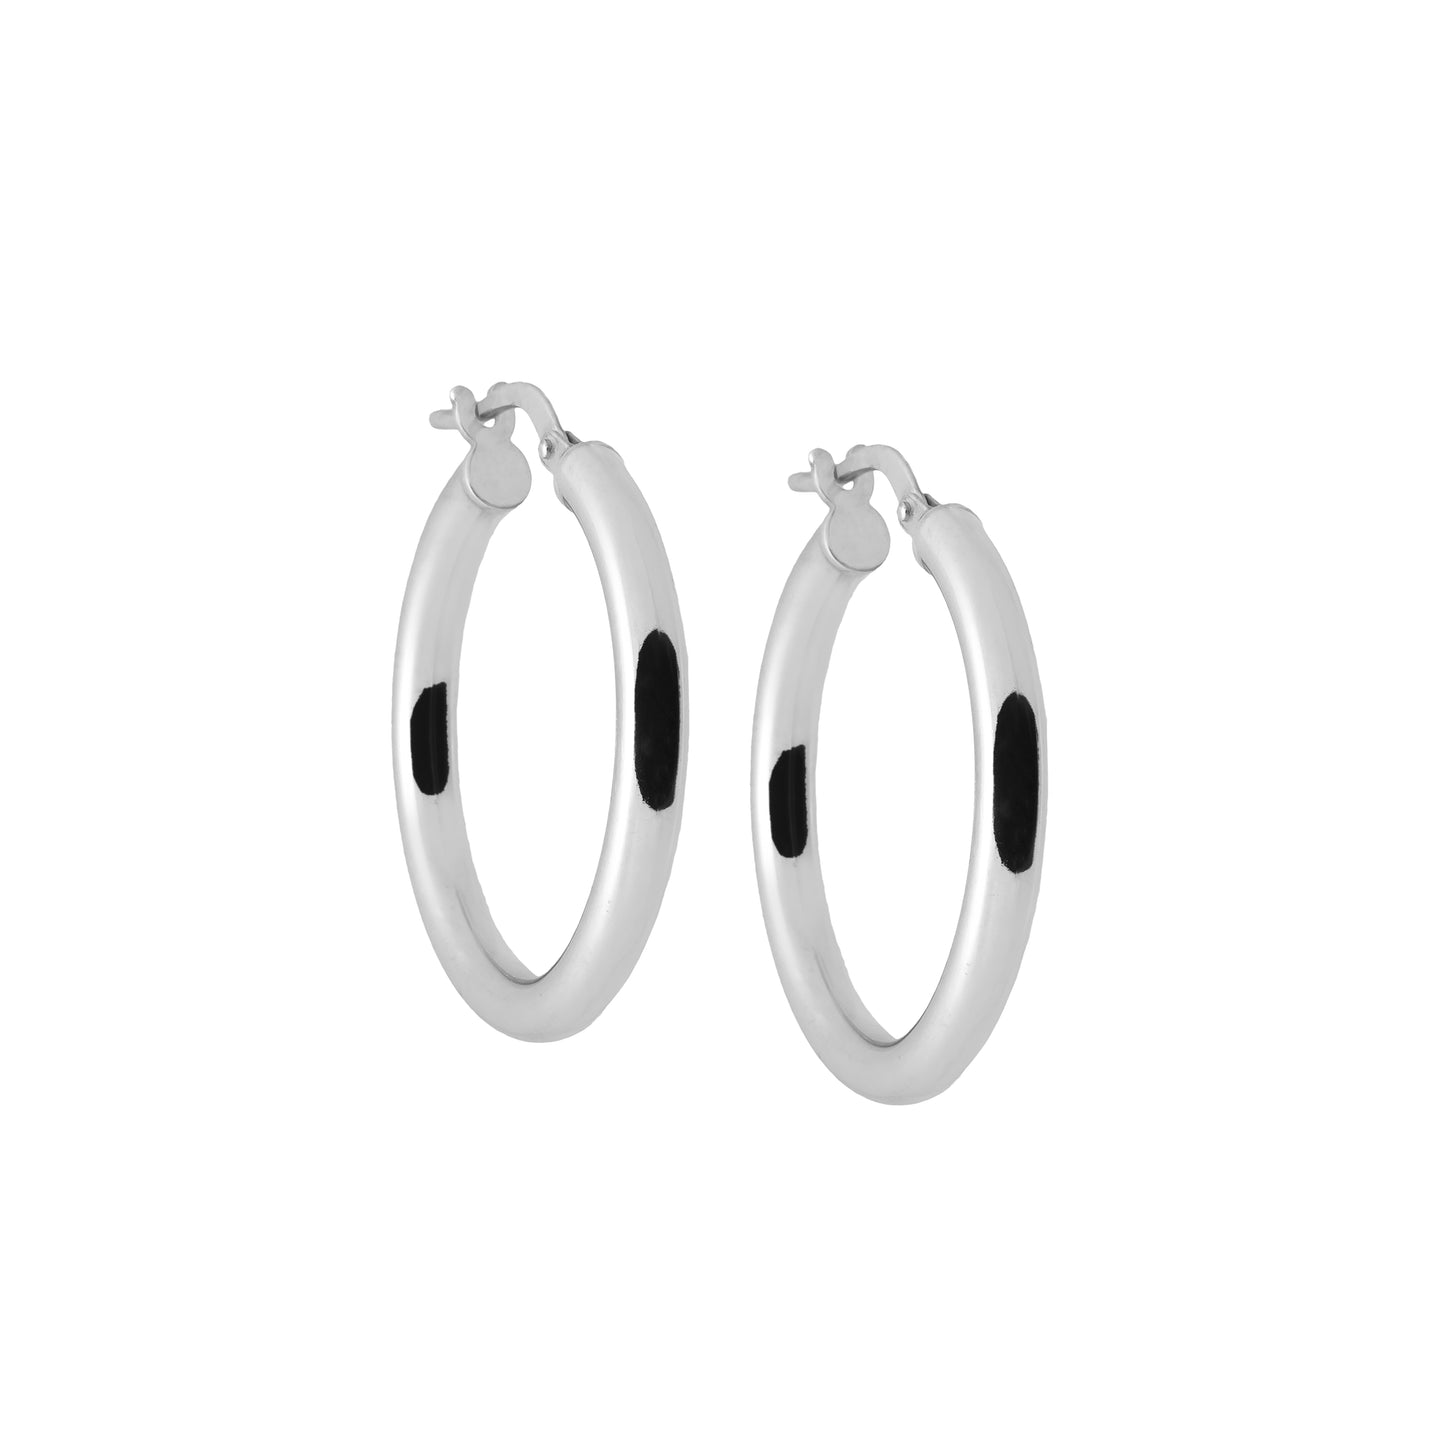 FOUNDATION HOOPS 20mm